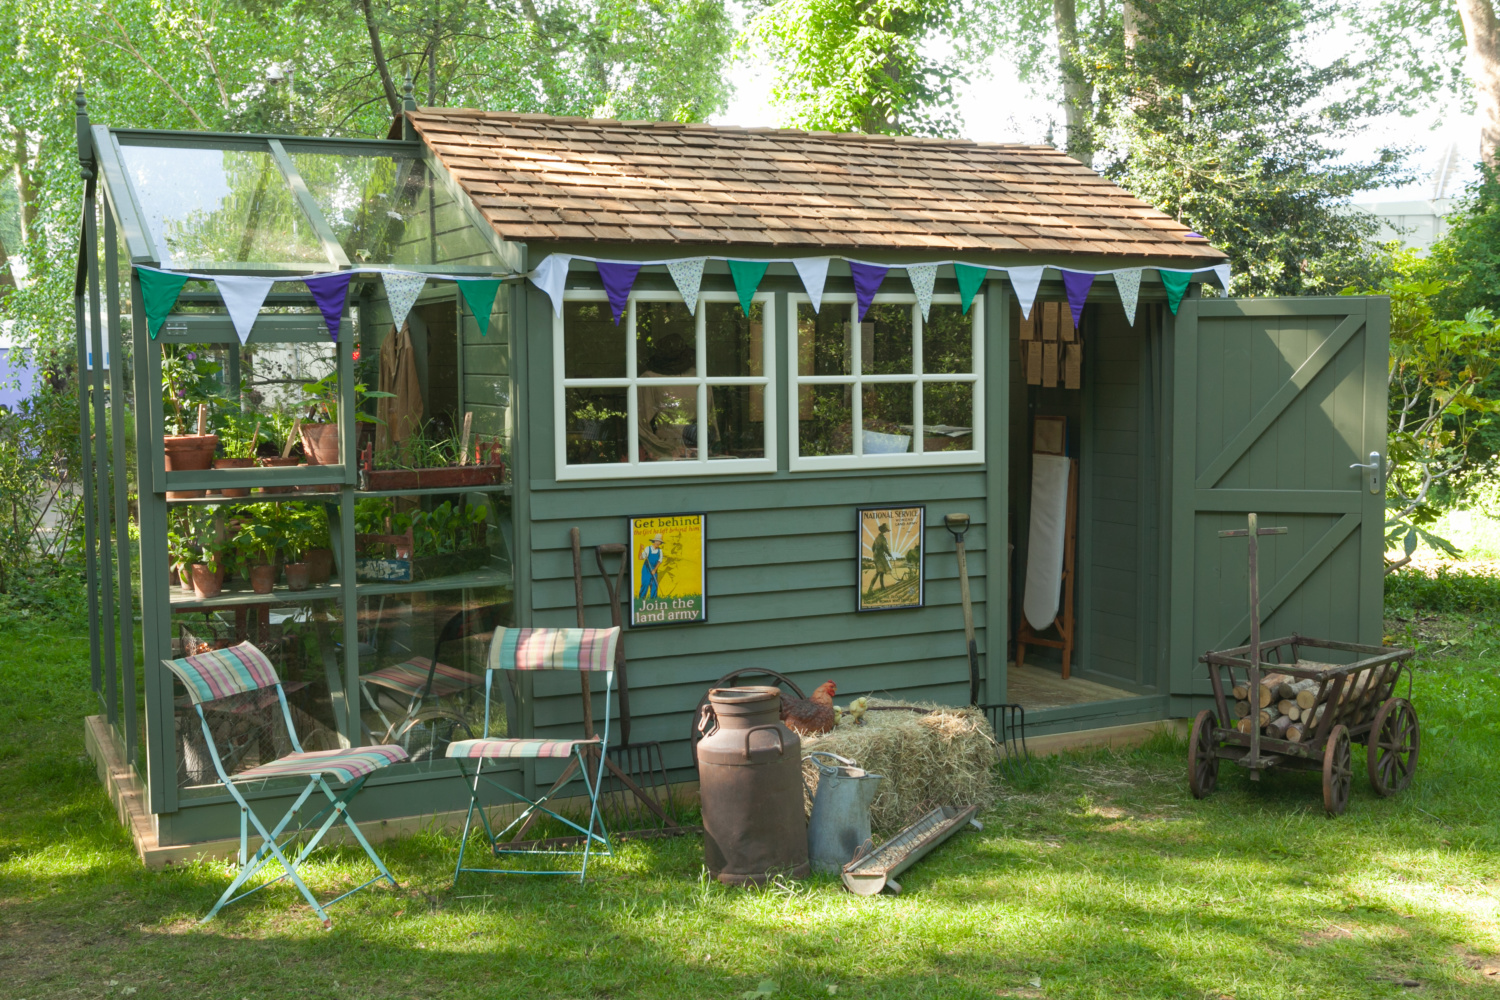 The Women's Land Army exhibit from Chelsea Flower Show 2018. The Holt Fusion garden building is part shed, part greenhouse, making the ideal potting shed.